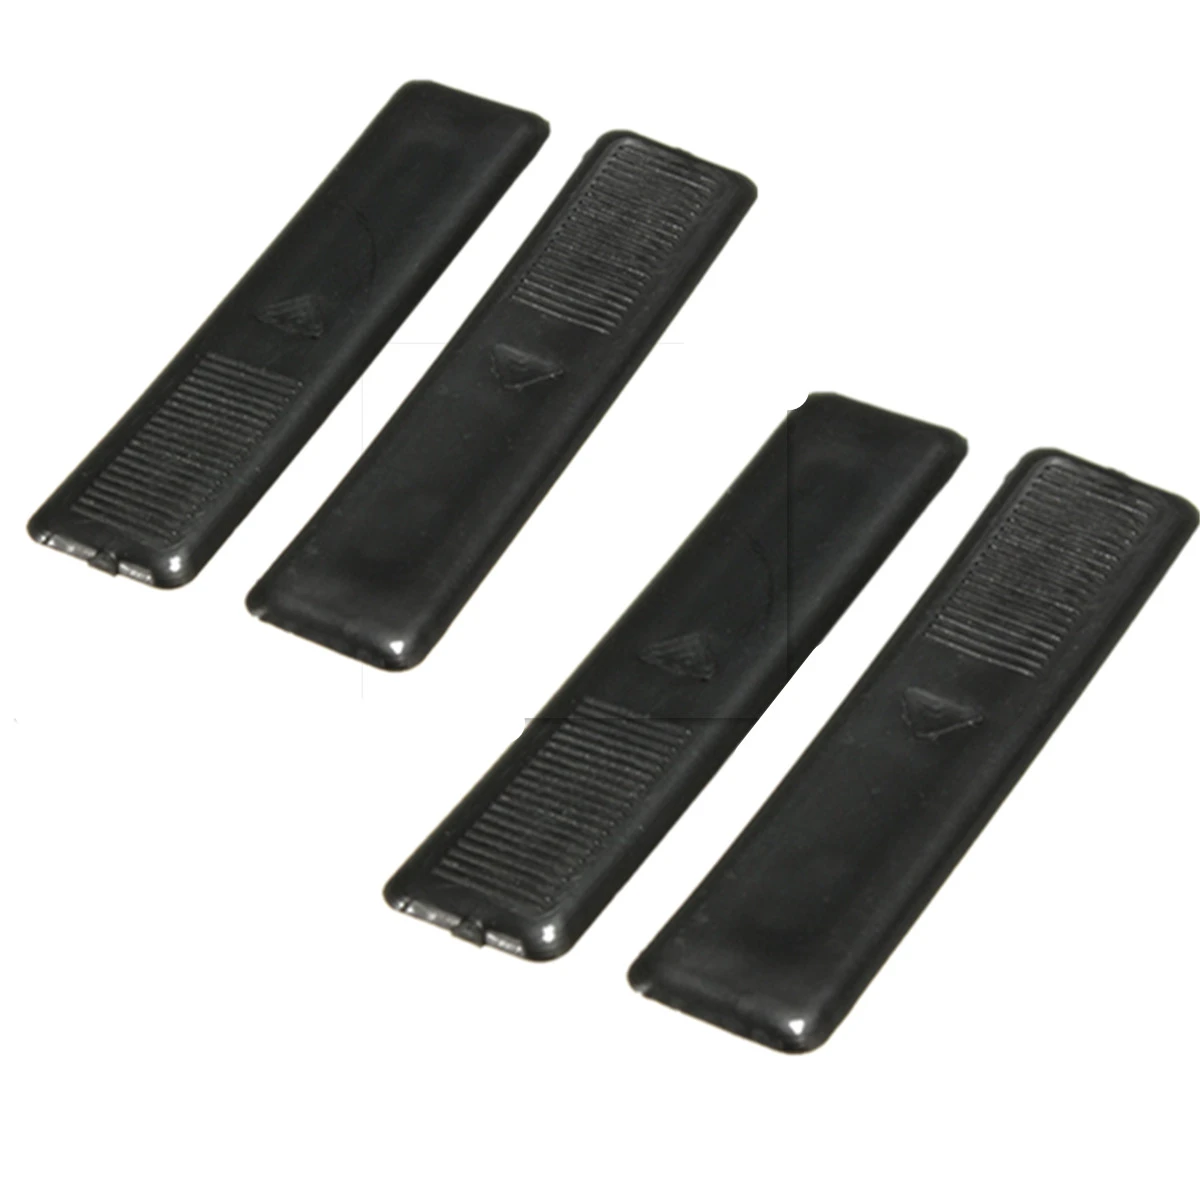 4 PCS Replacement Roof Rail Rack Moulding Clip Cover For Mazda 2 3 6 CX7 CX9 CX5